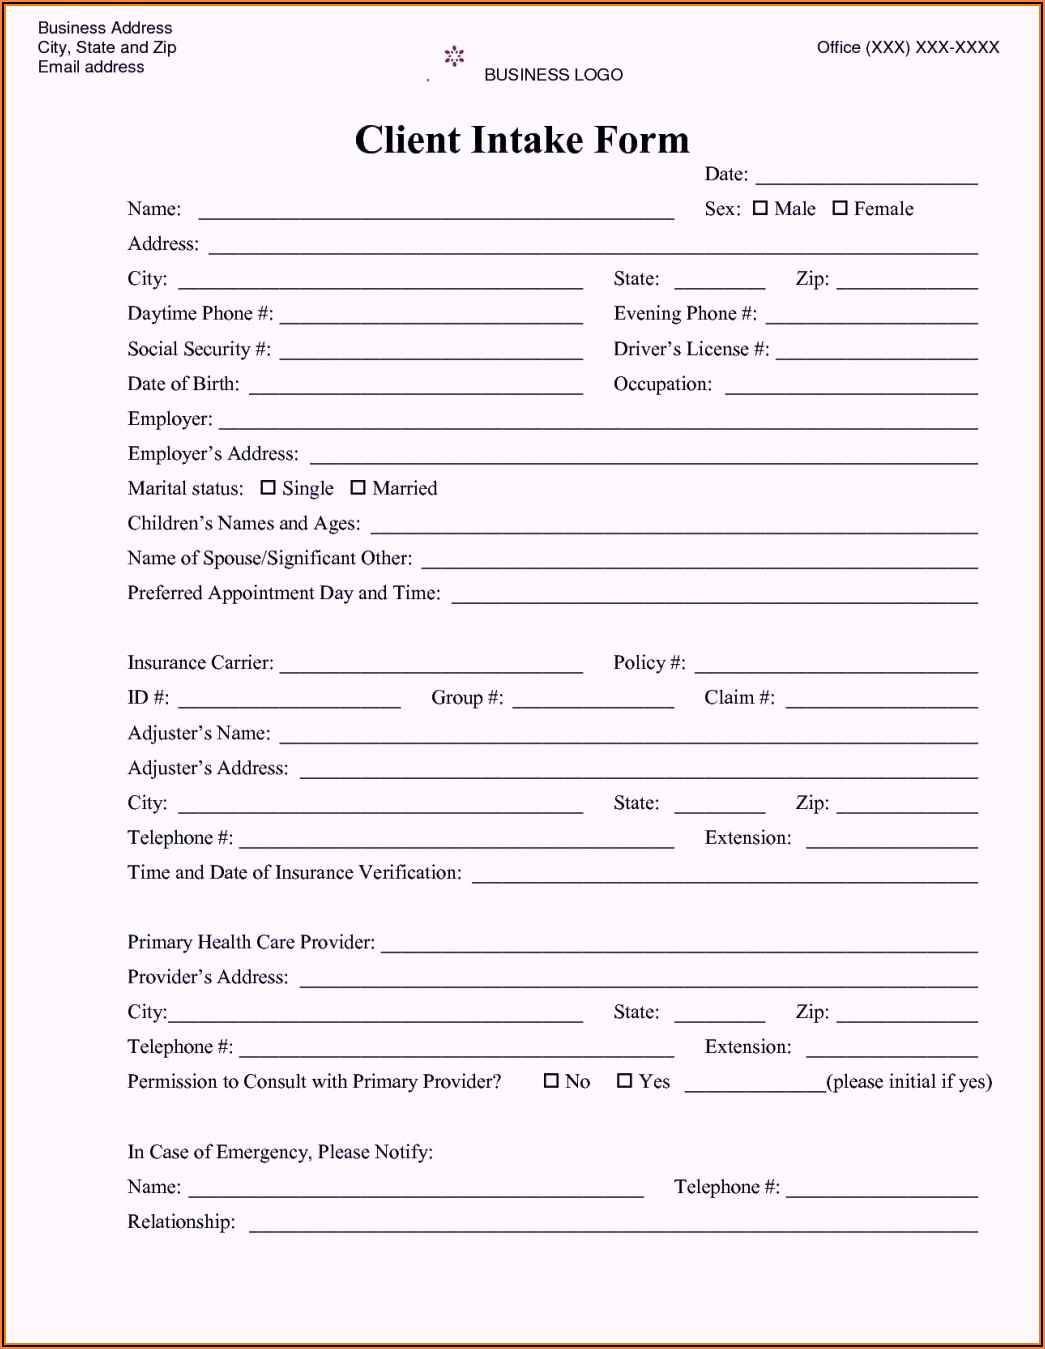 Sample Legal Client Intake Form